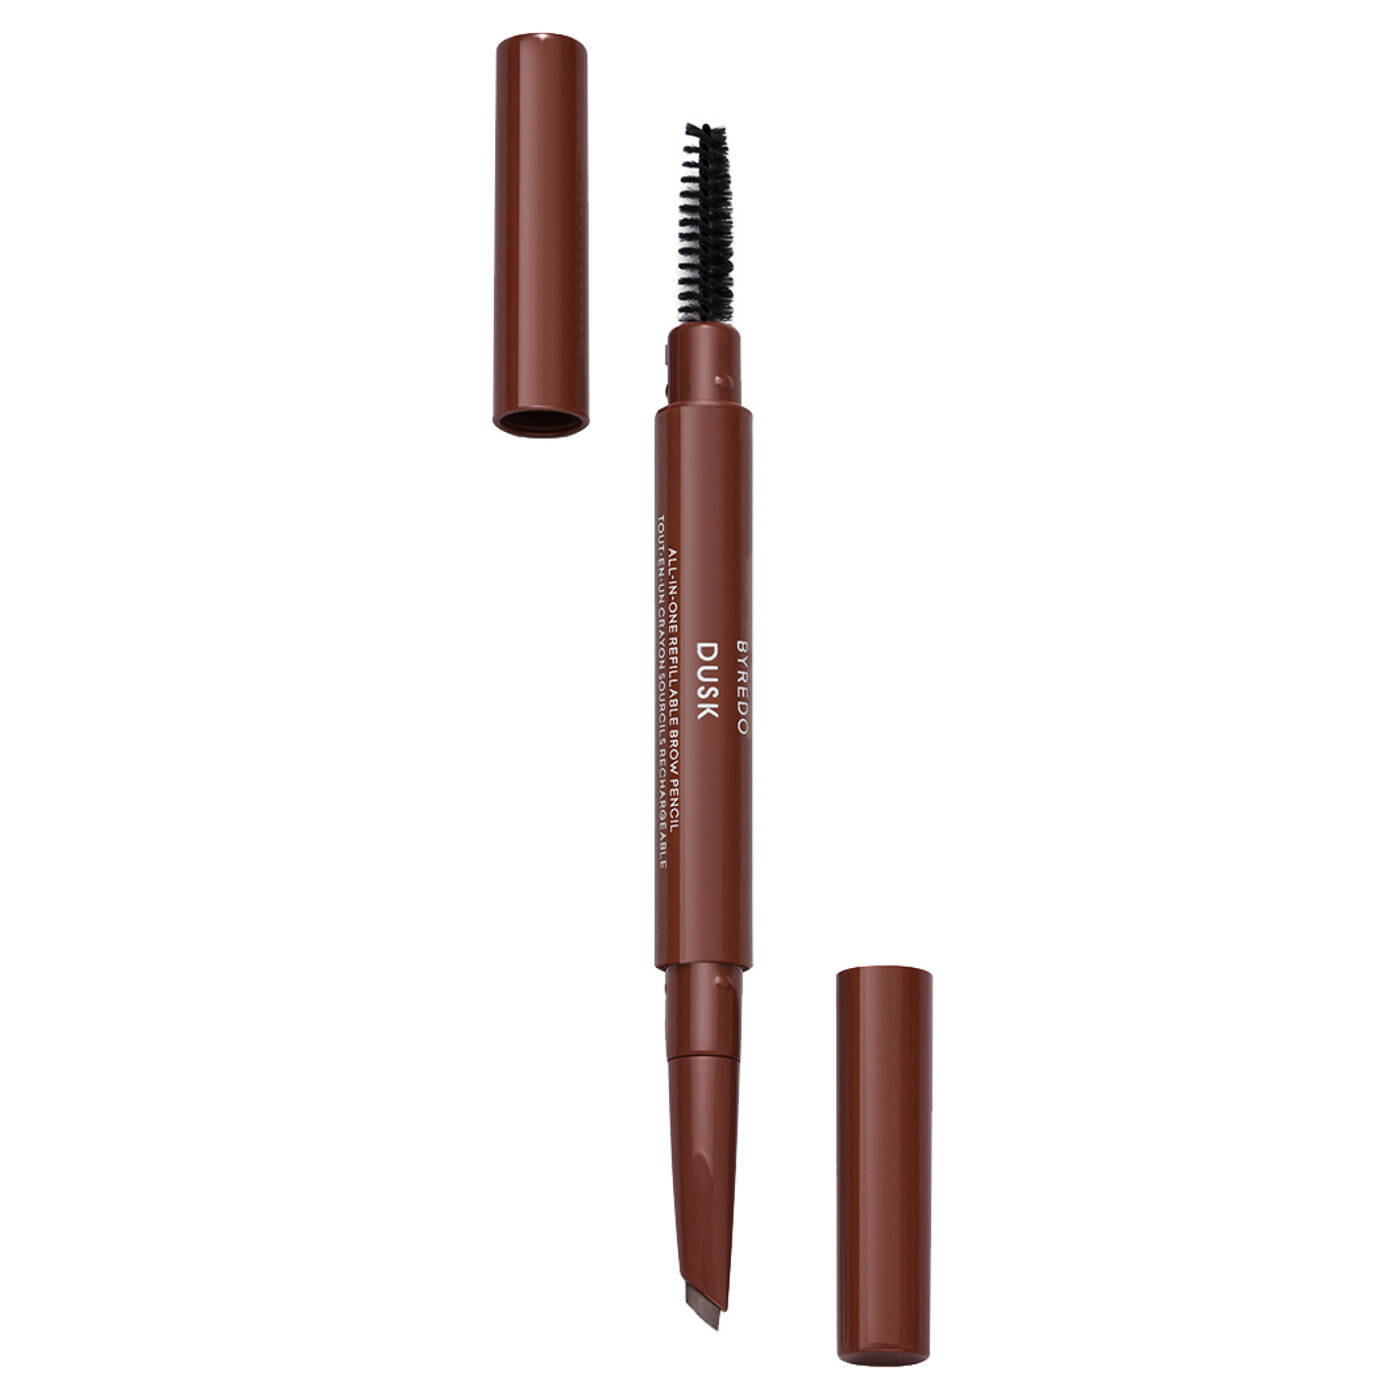 All-In-One Brow Pencil Dusk + Refill